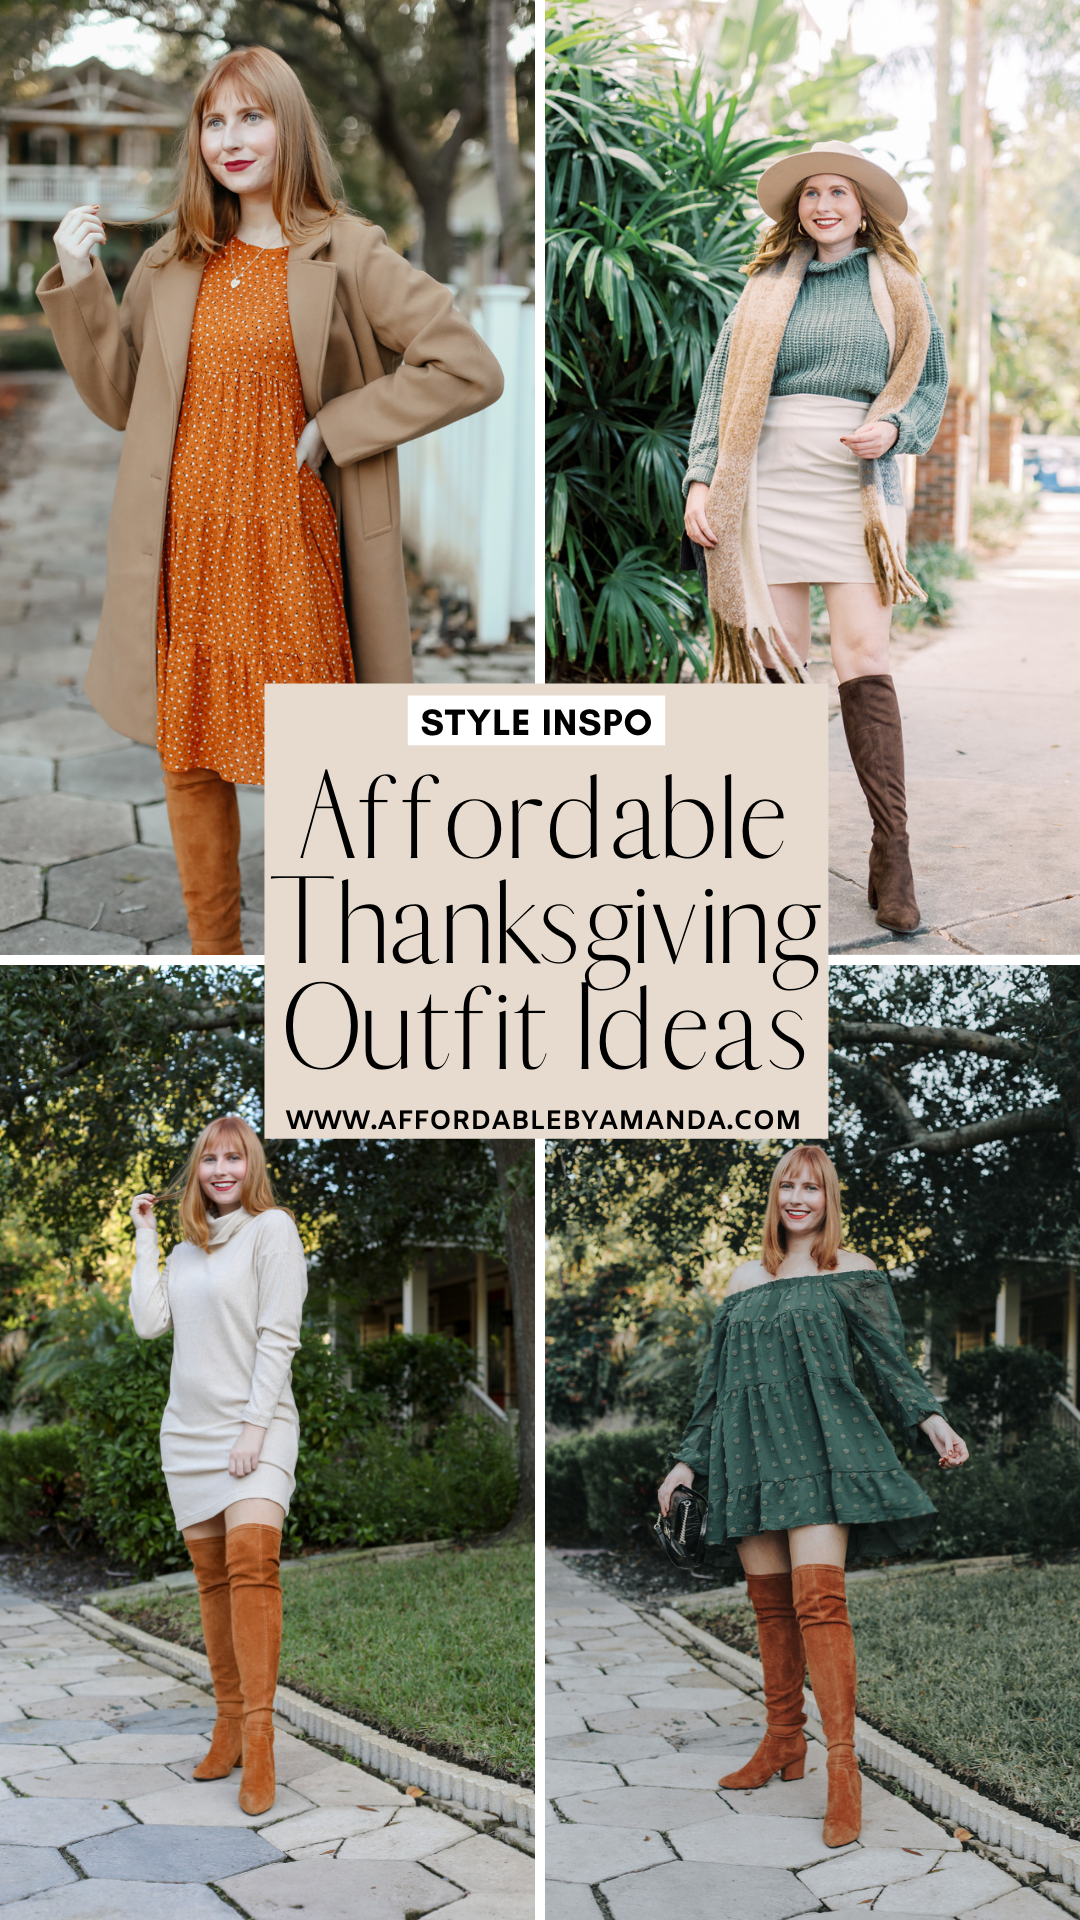 10 outfit ideas for Thanksgiving - GirlsLife